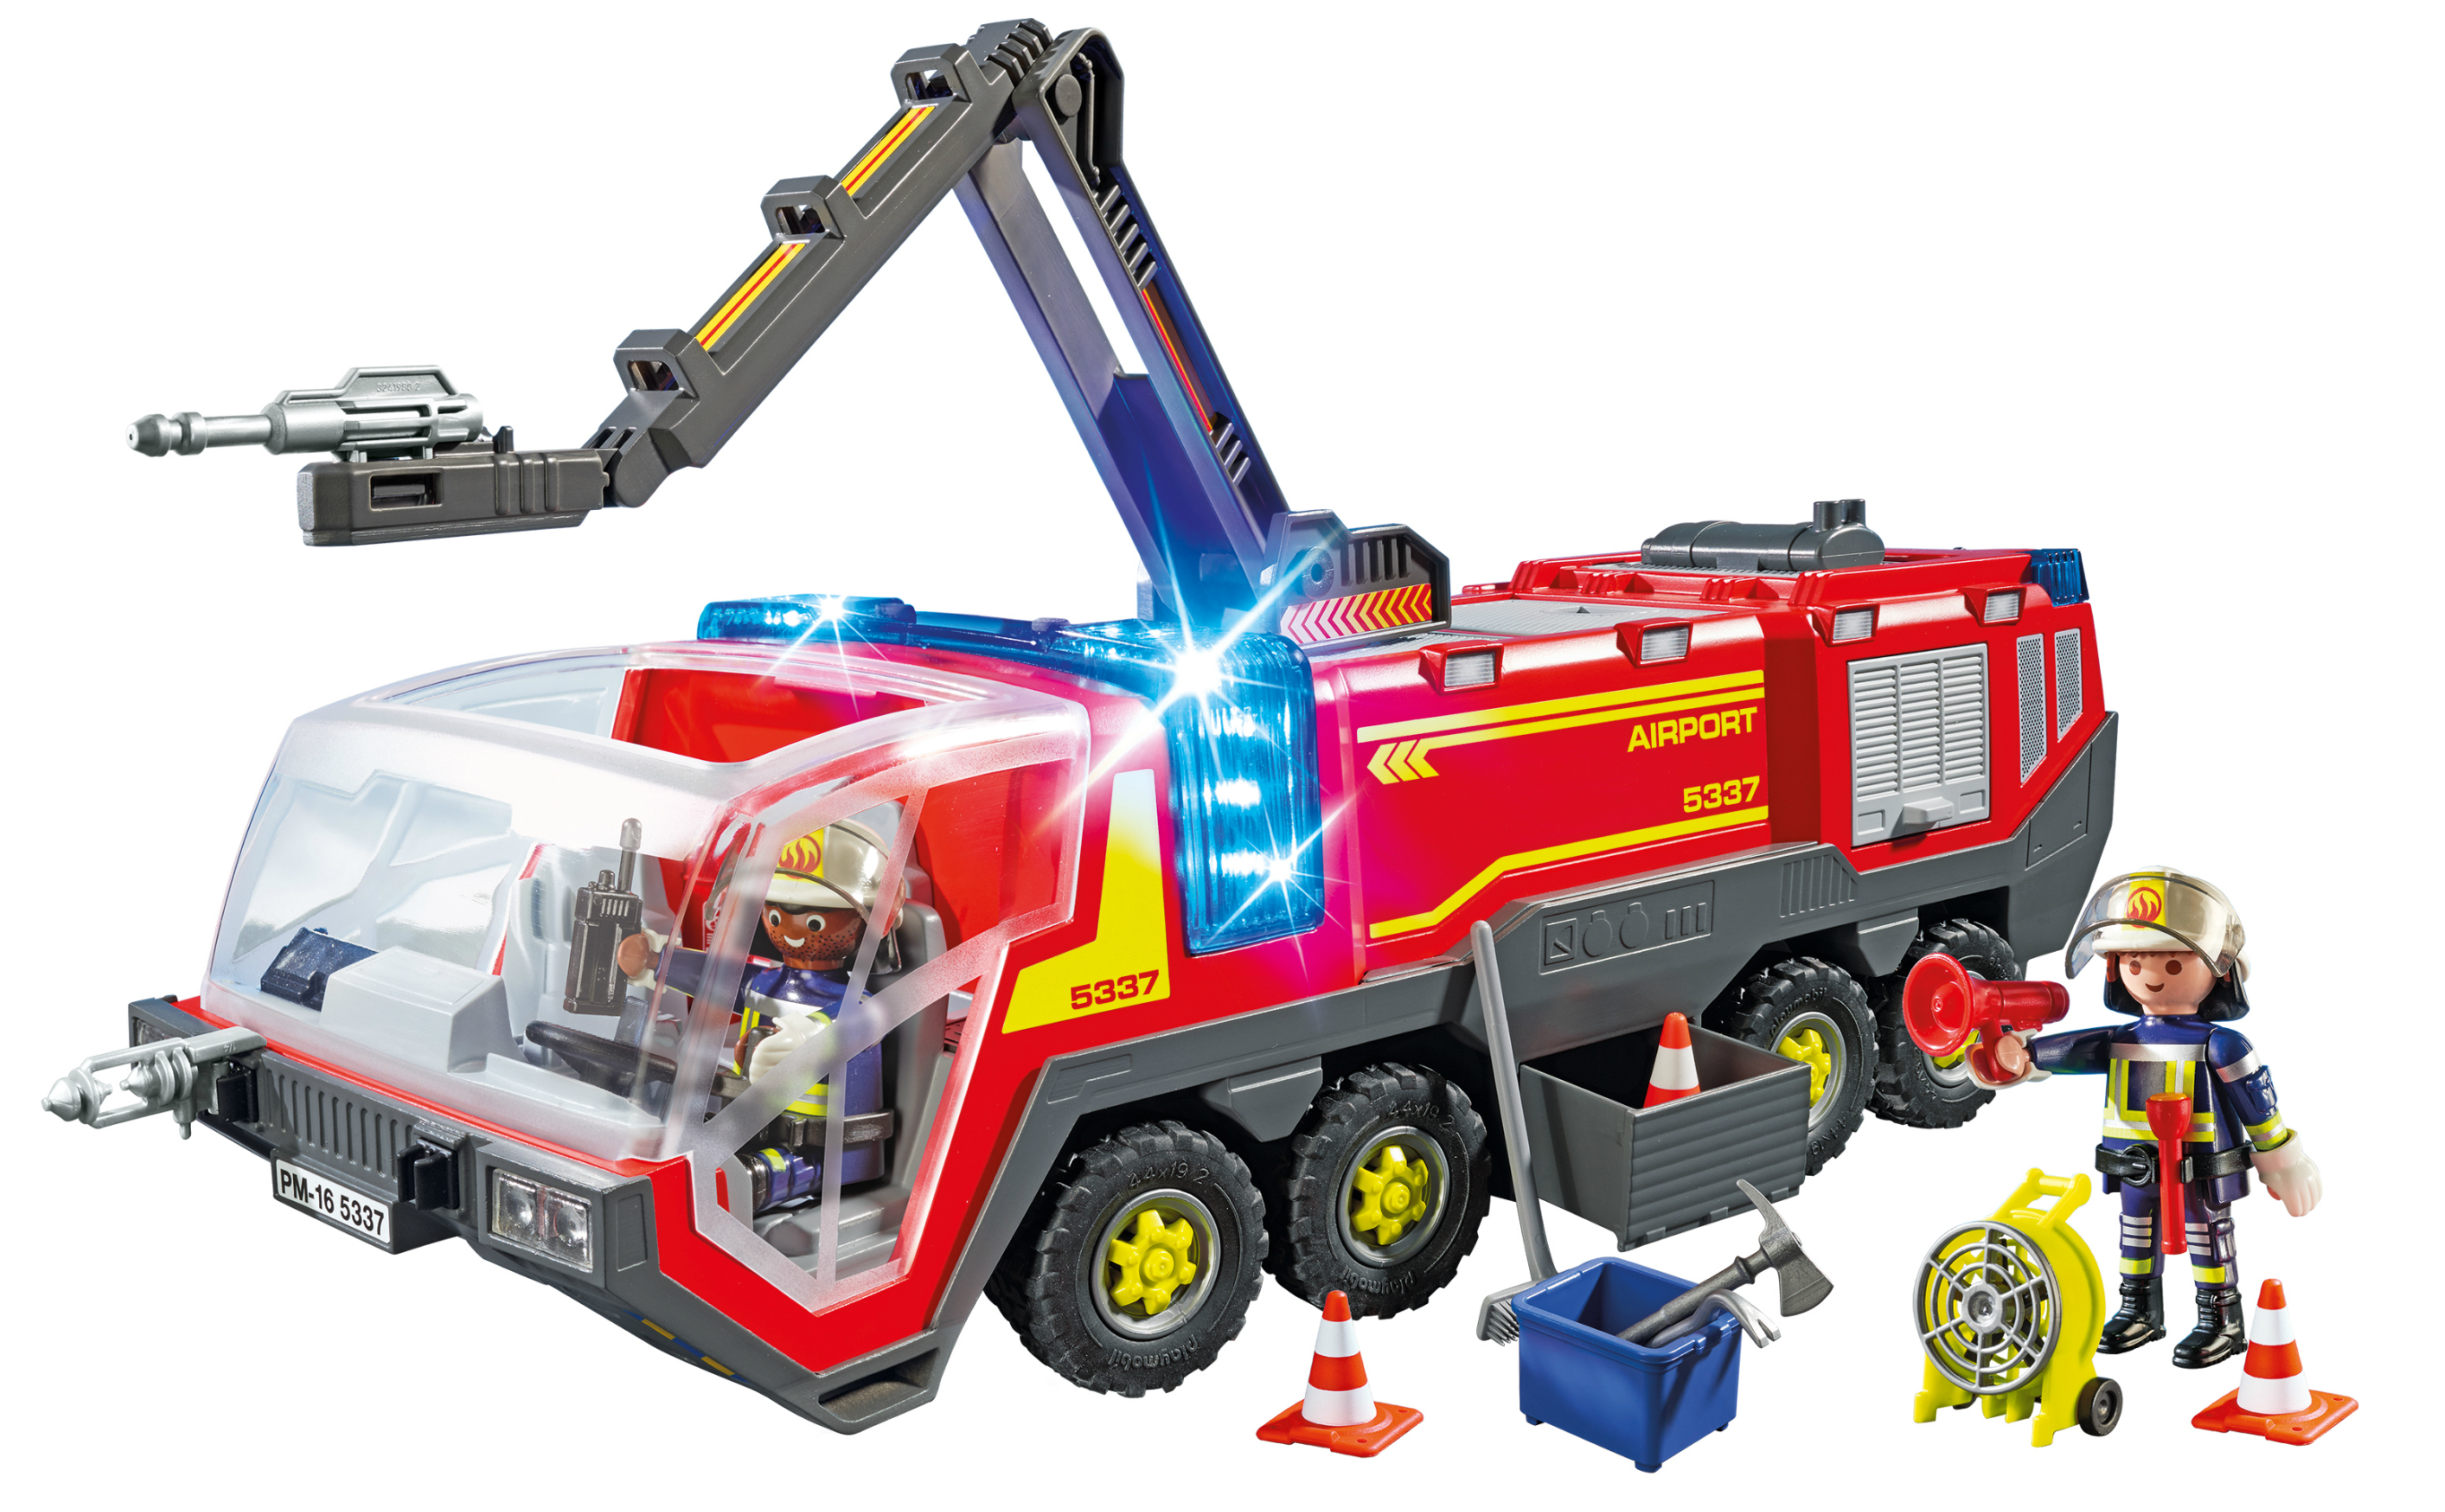 Playmobil Airport Fire Engine, $32.95 at Walmart - The Krazy Coupon Lady